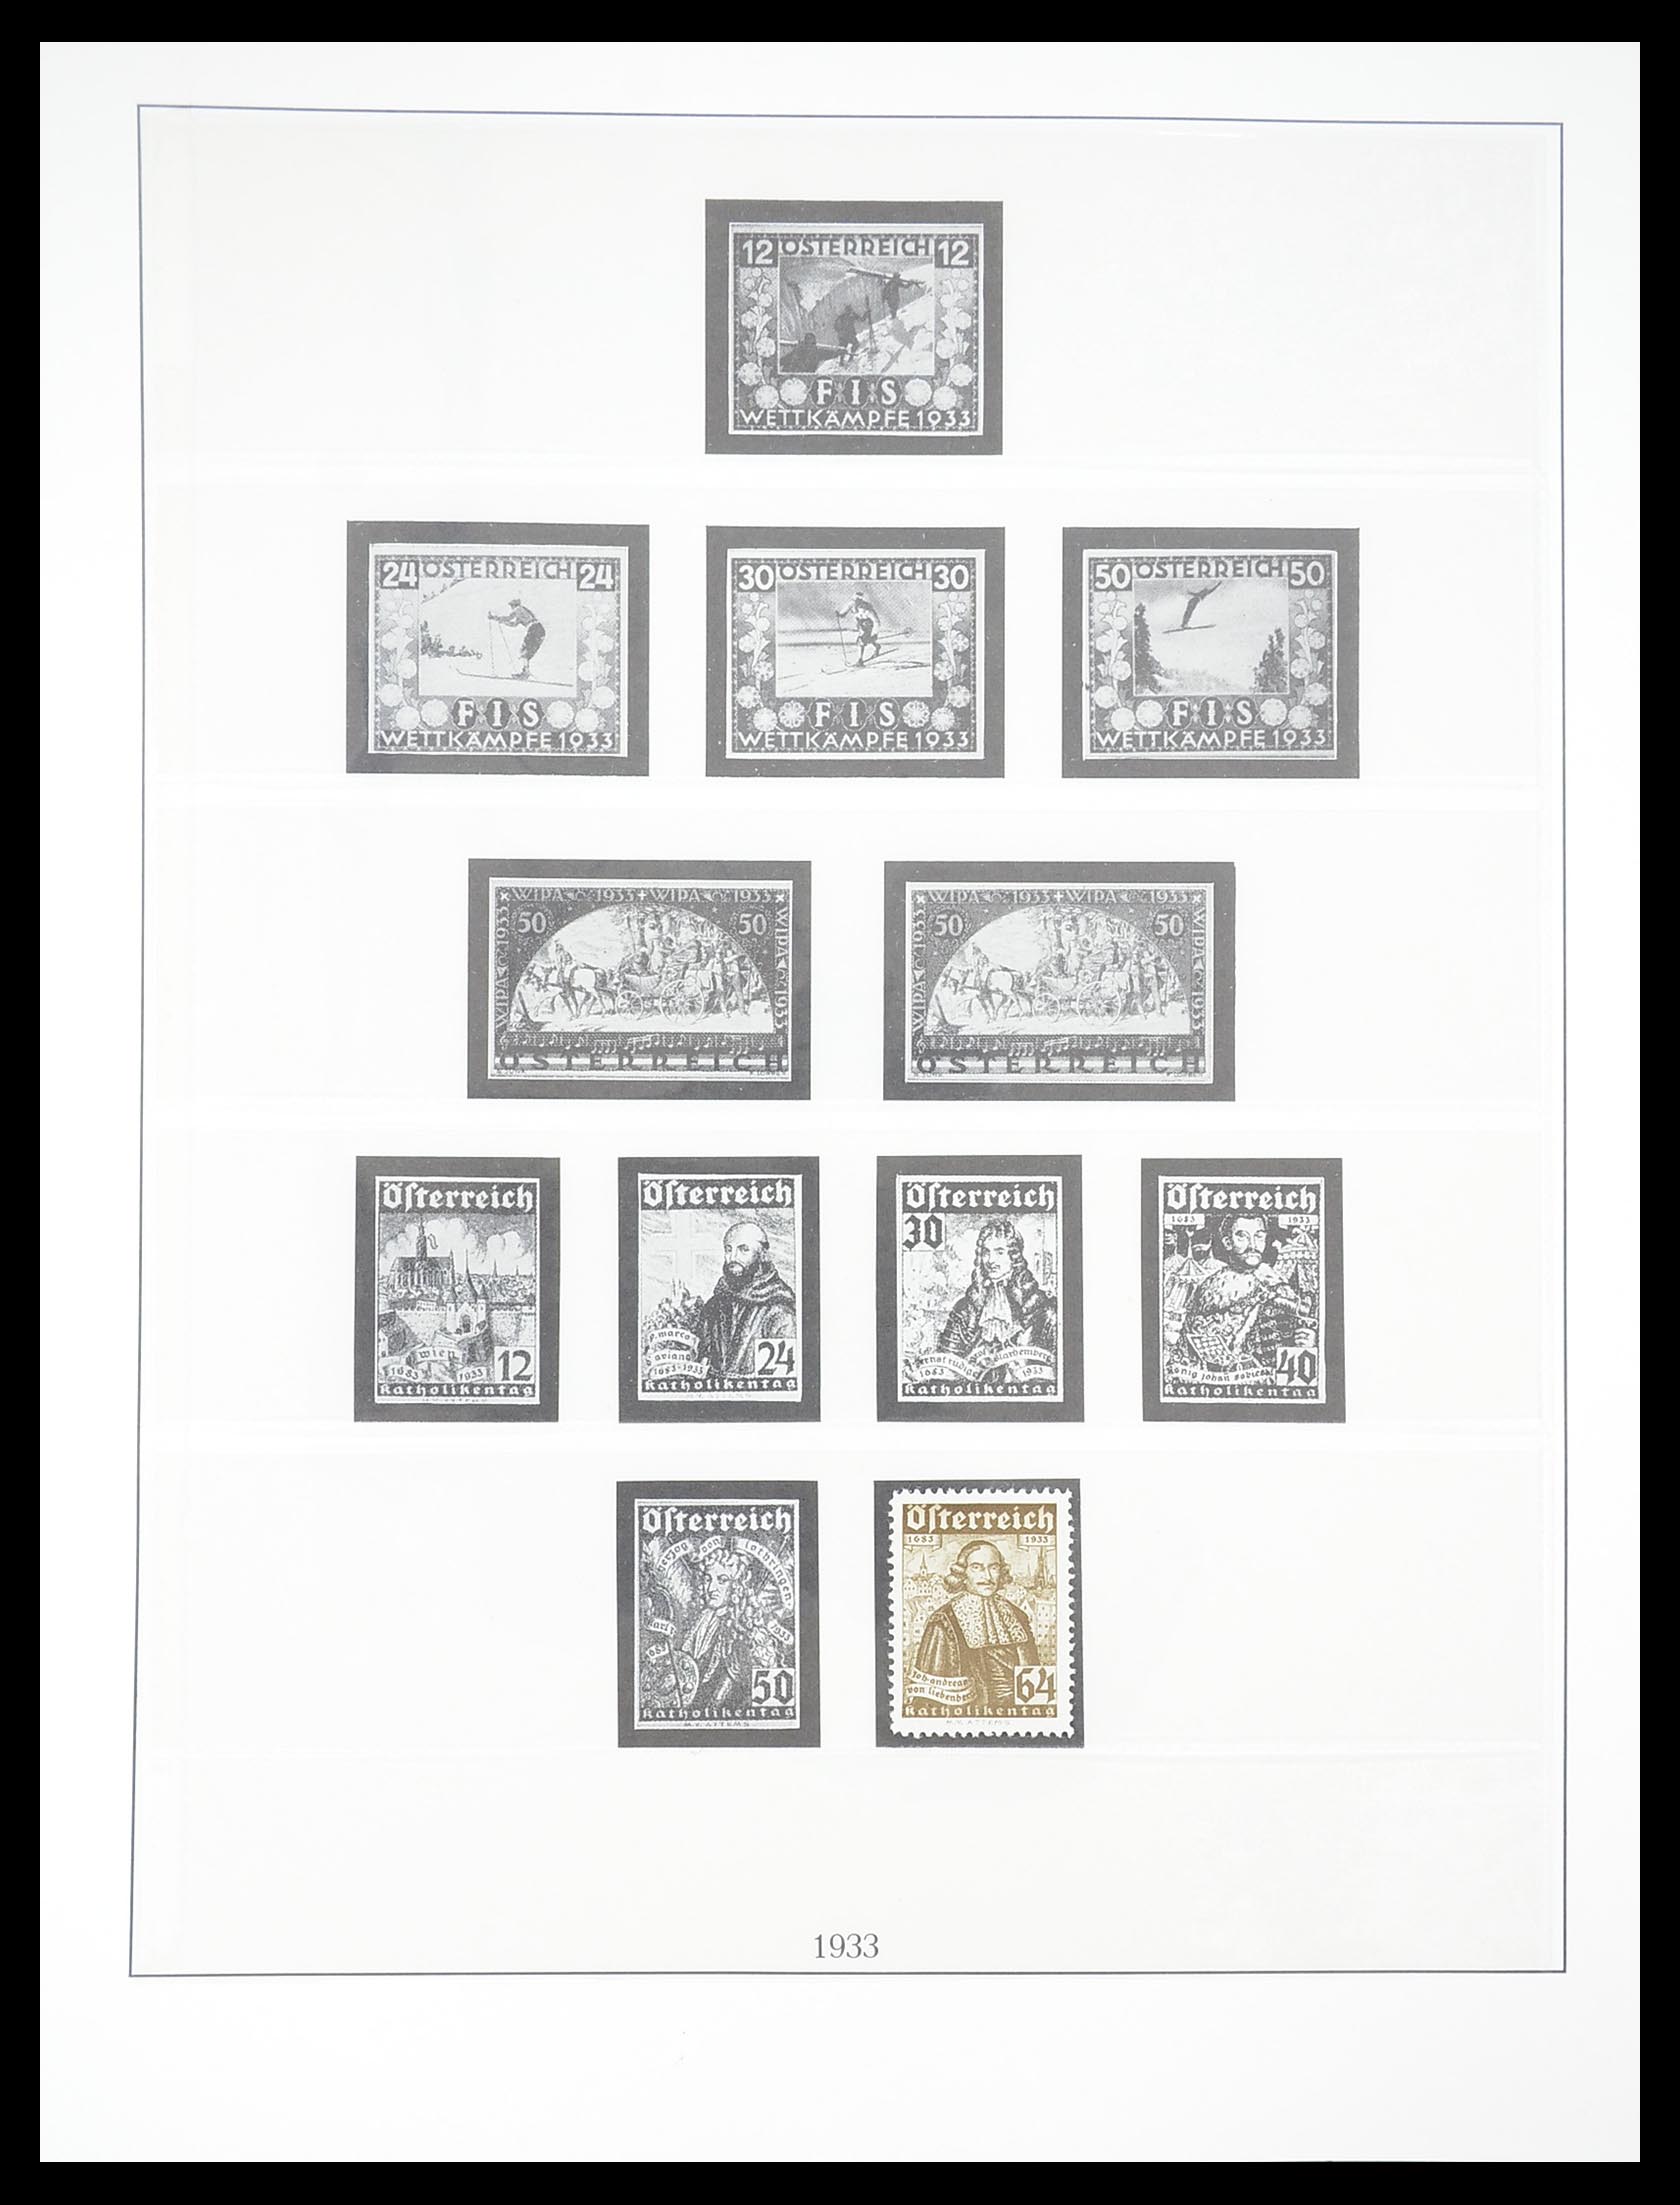 33189 079 - Stamp collection 33189 European countries 1850-1950.